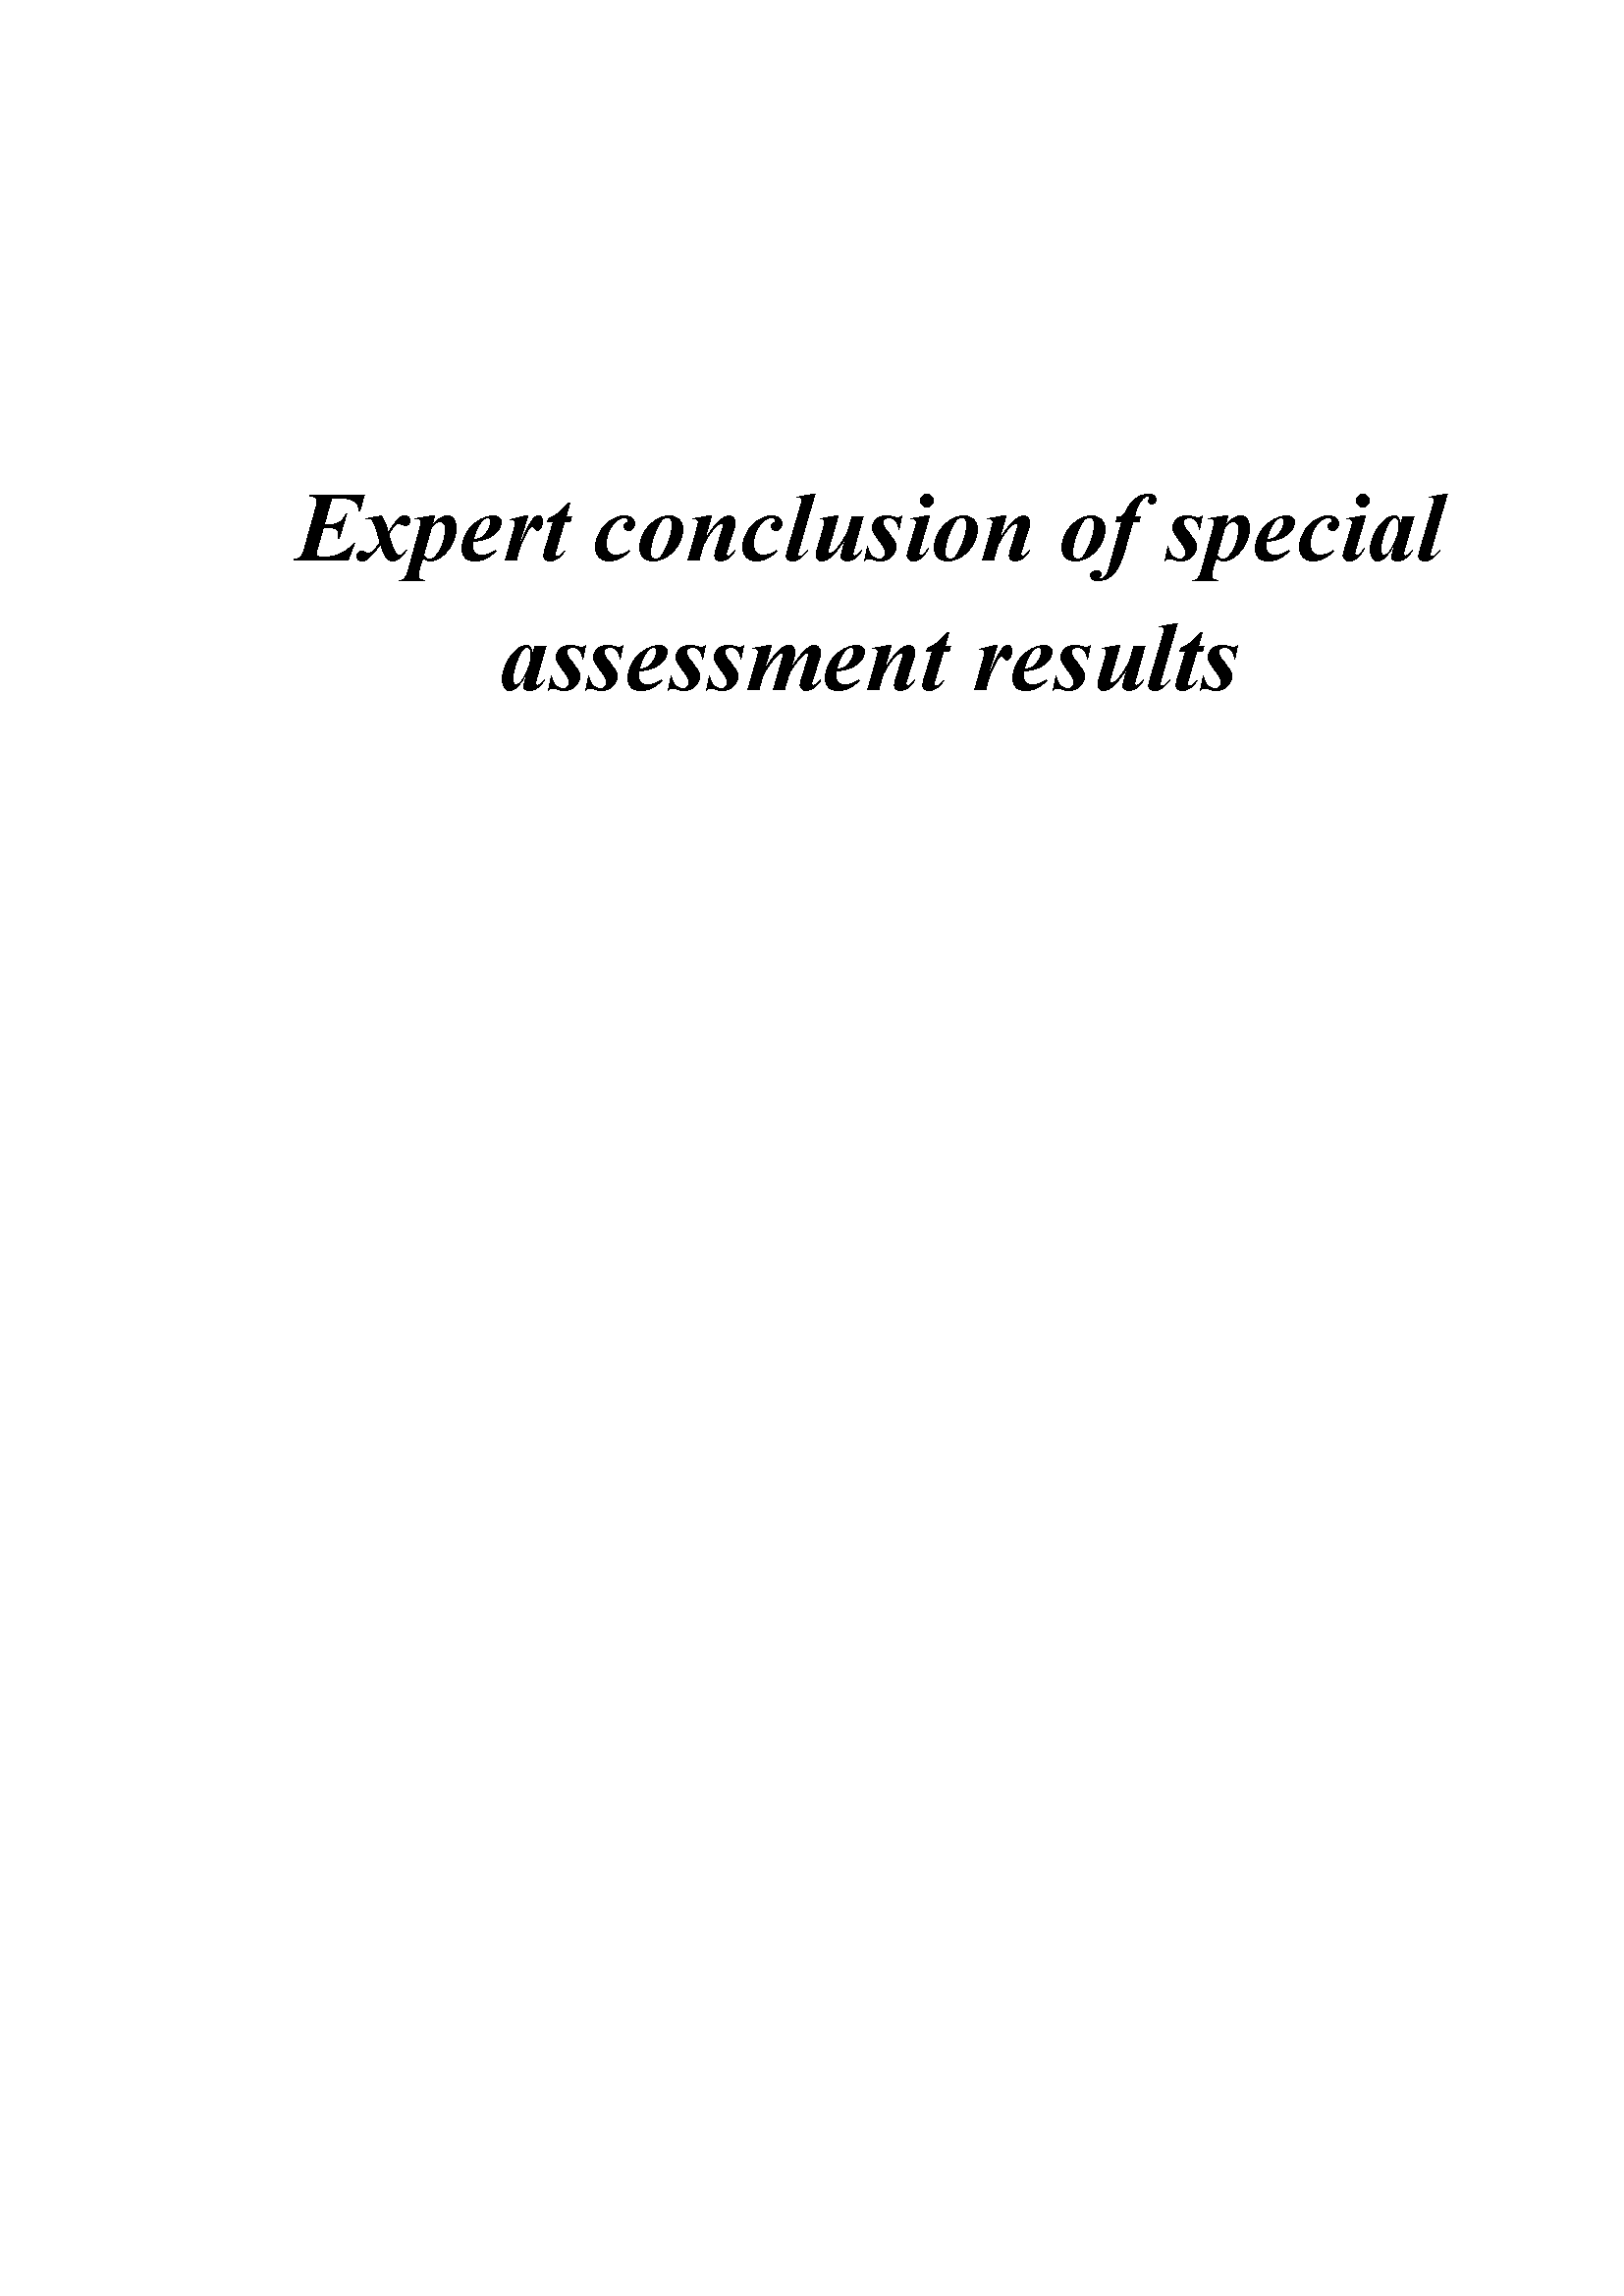 Expert conclusion of special assessment